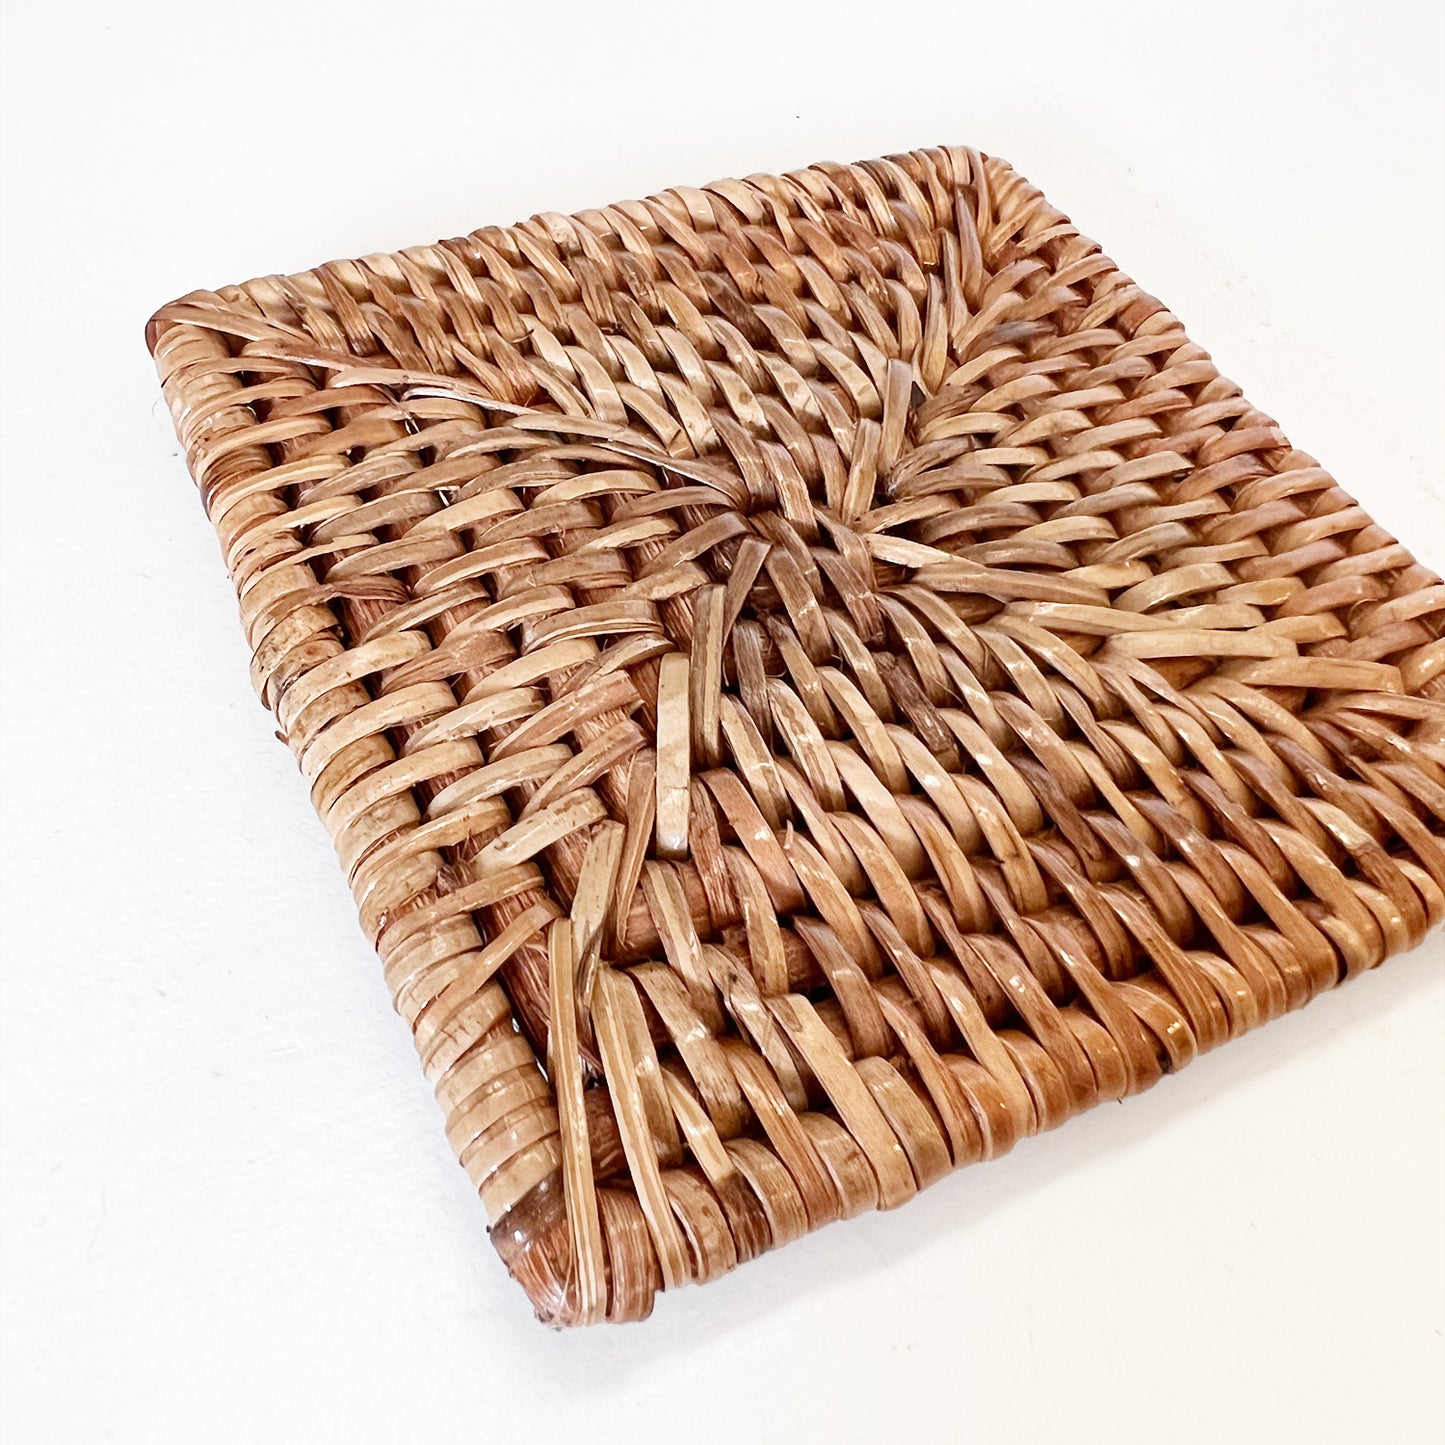 A square rattan coasters with intricate woven patterns.